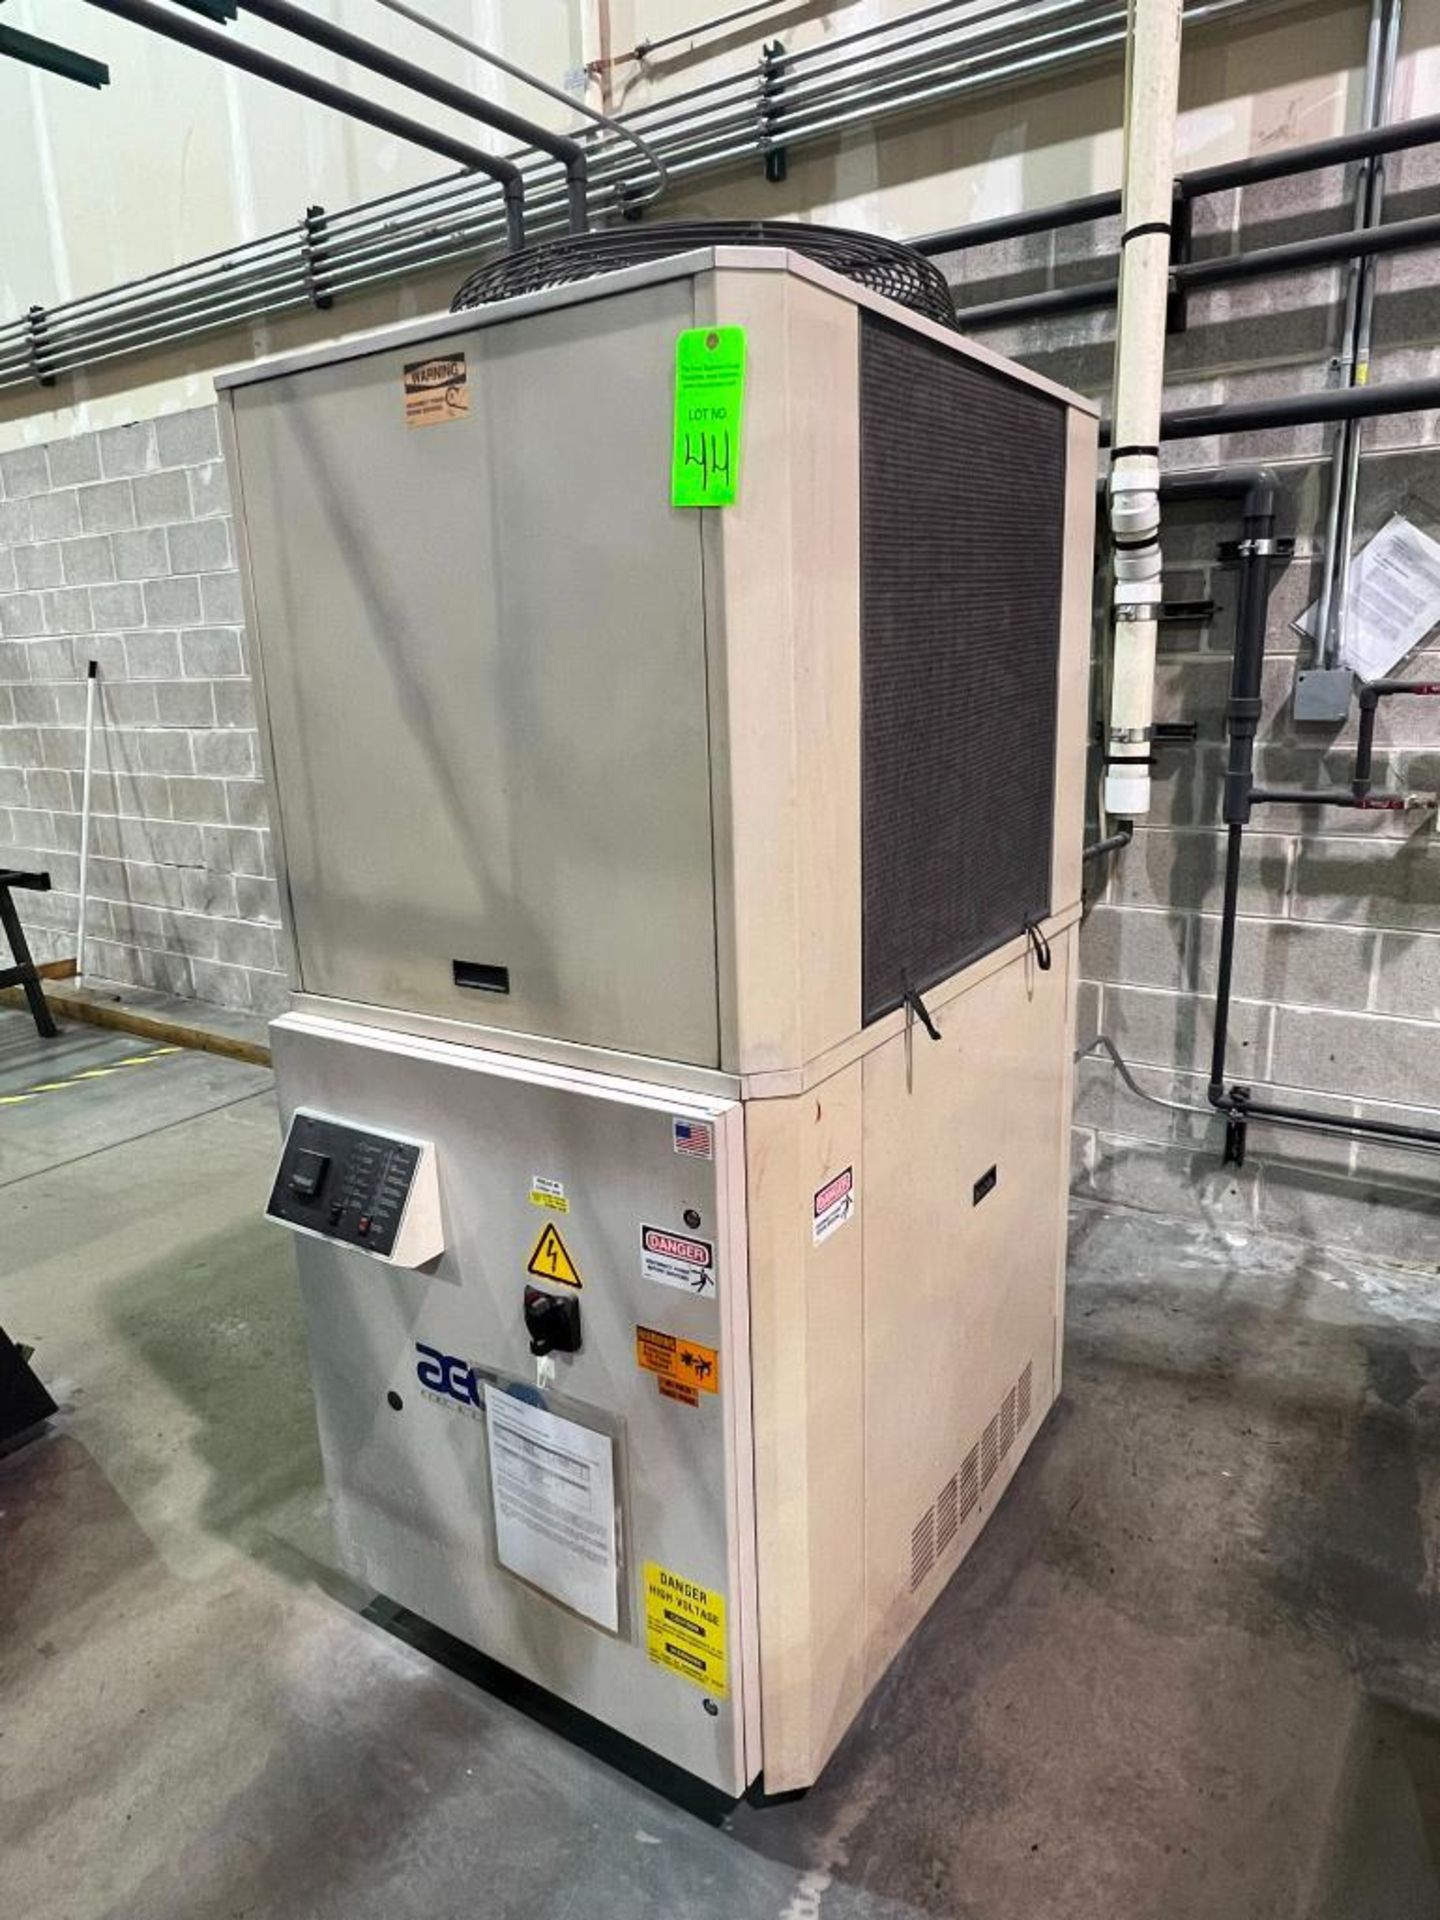 Aec Model Psa-7.5 Portable Air Cooled Chiller - Image 2 of 5